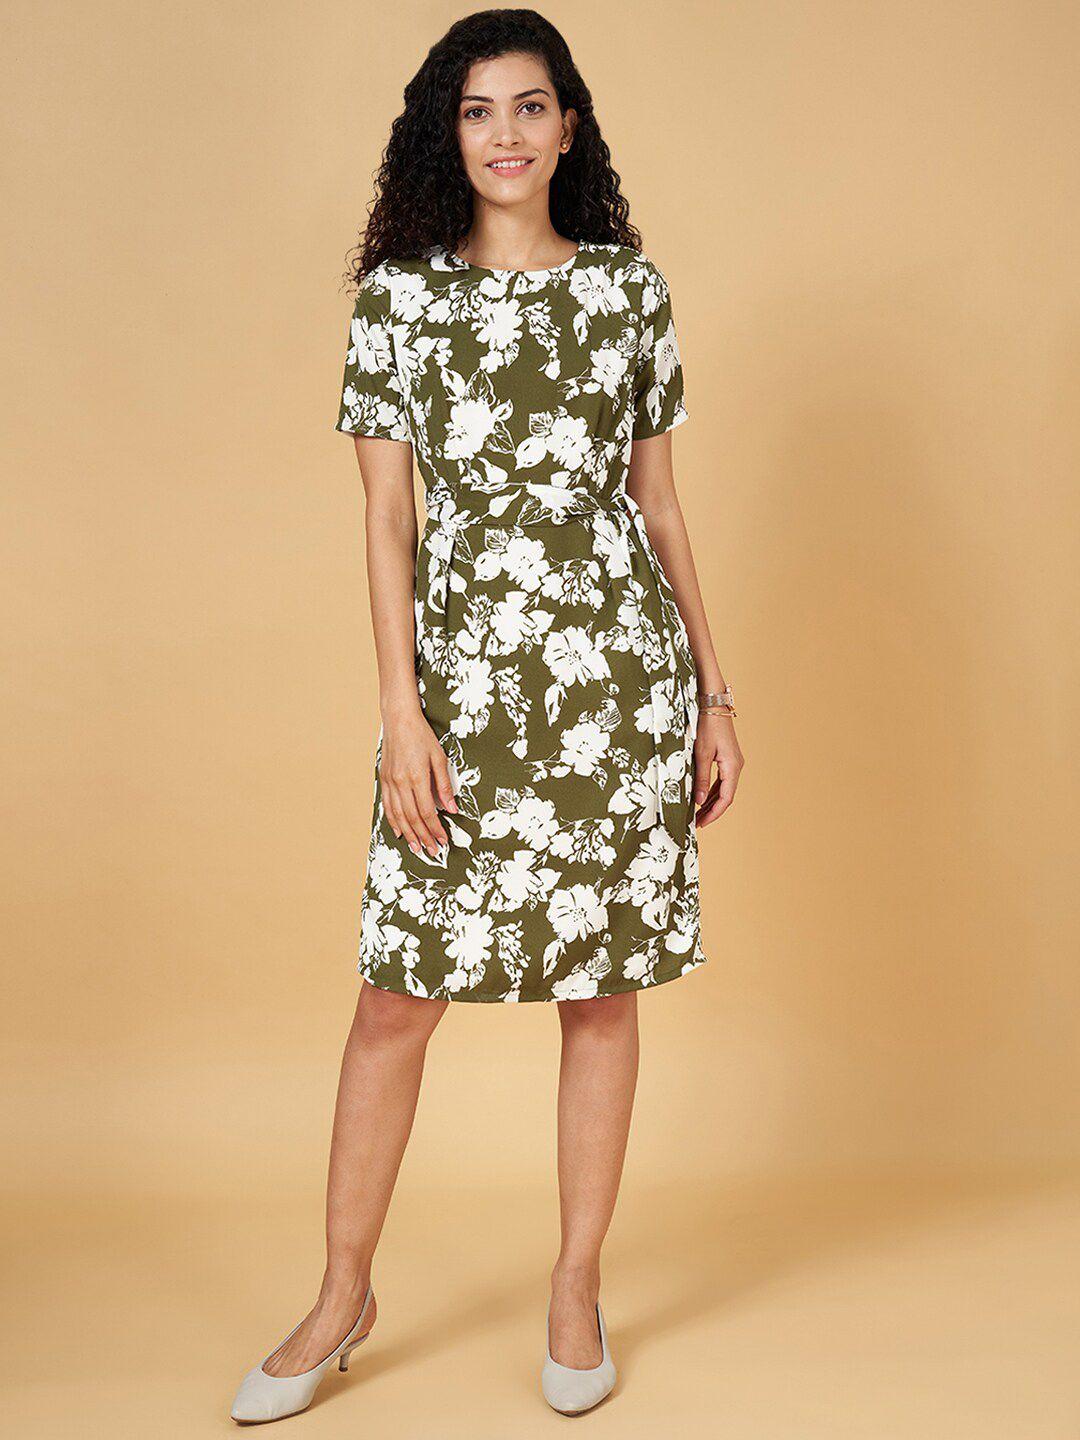 annabelle by pantaloons floral printed round neck fit & flare dress